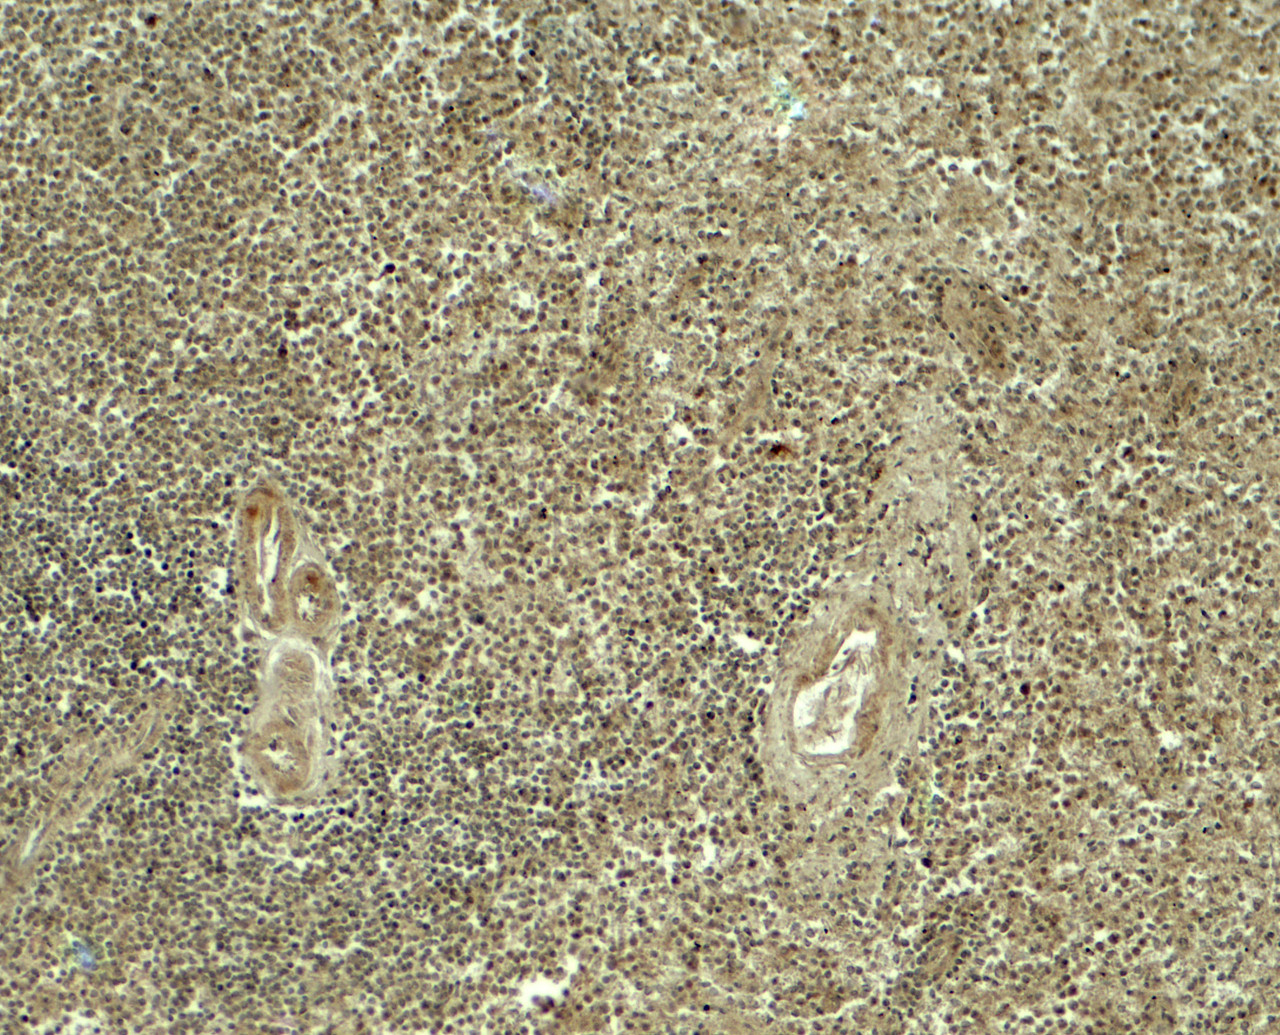 Immunohistochemistry of ATG4A in human spleen tissue with ATG4A antibody at 5 ug/ml.